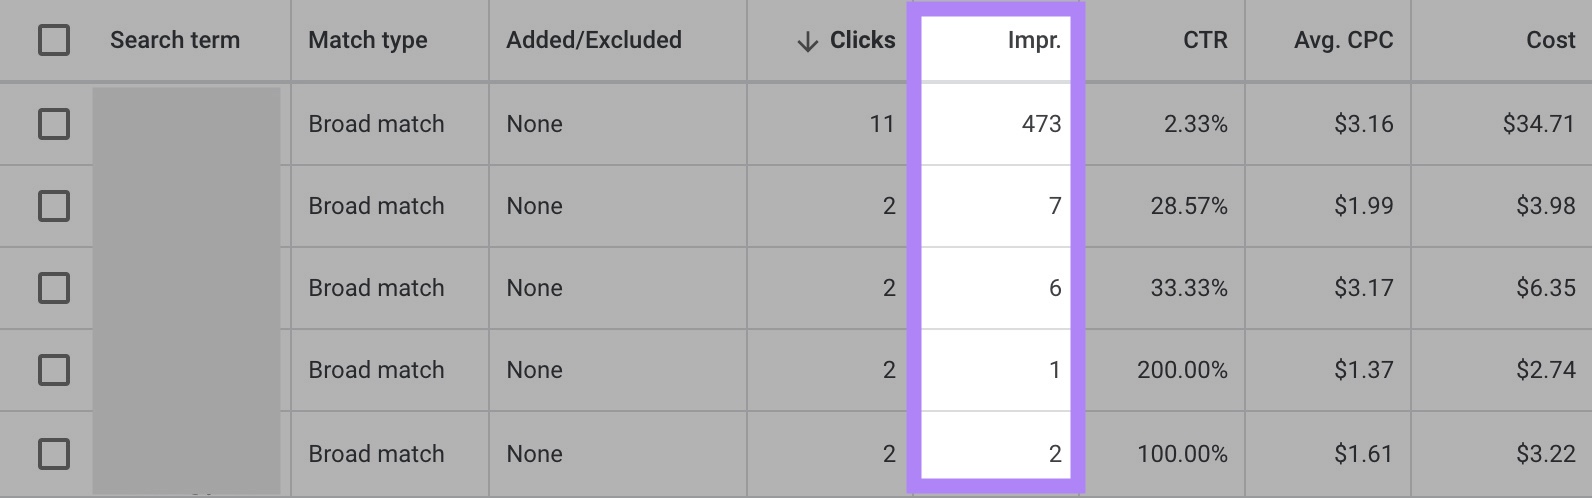 Impressions metric within Google Ads